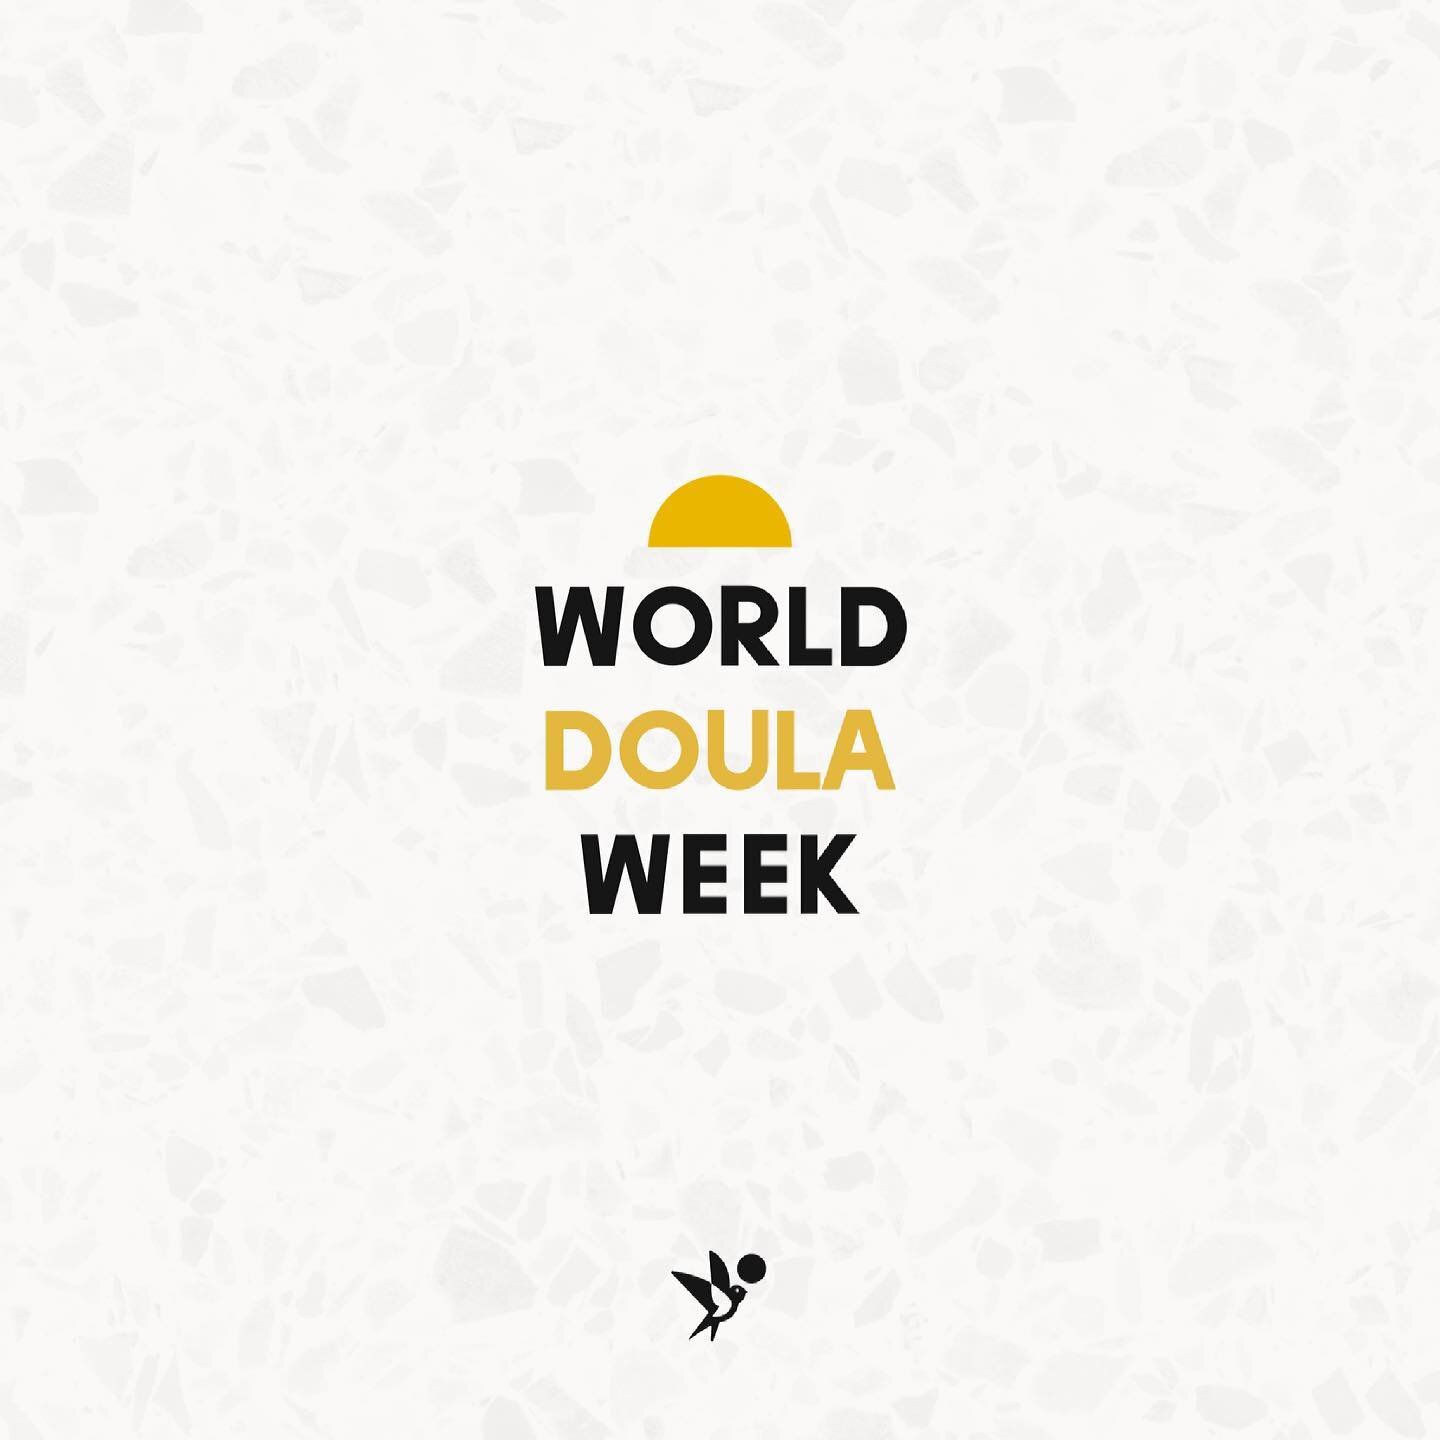 Happy World Doula week. Doulas help the world go &lsquo;round AND the word doula and its Greek origins meaning female slave/servant are problematic.

I use doula and companion to describe what I do because sometimes I feel disconnected from the term 